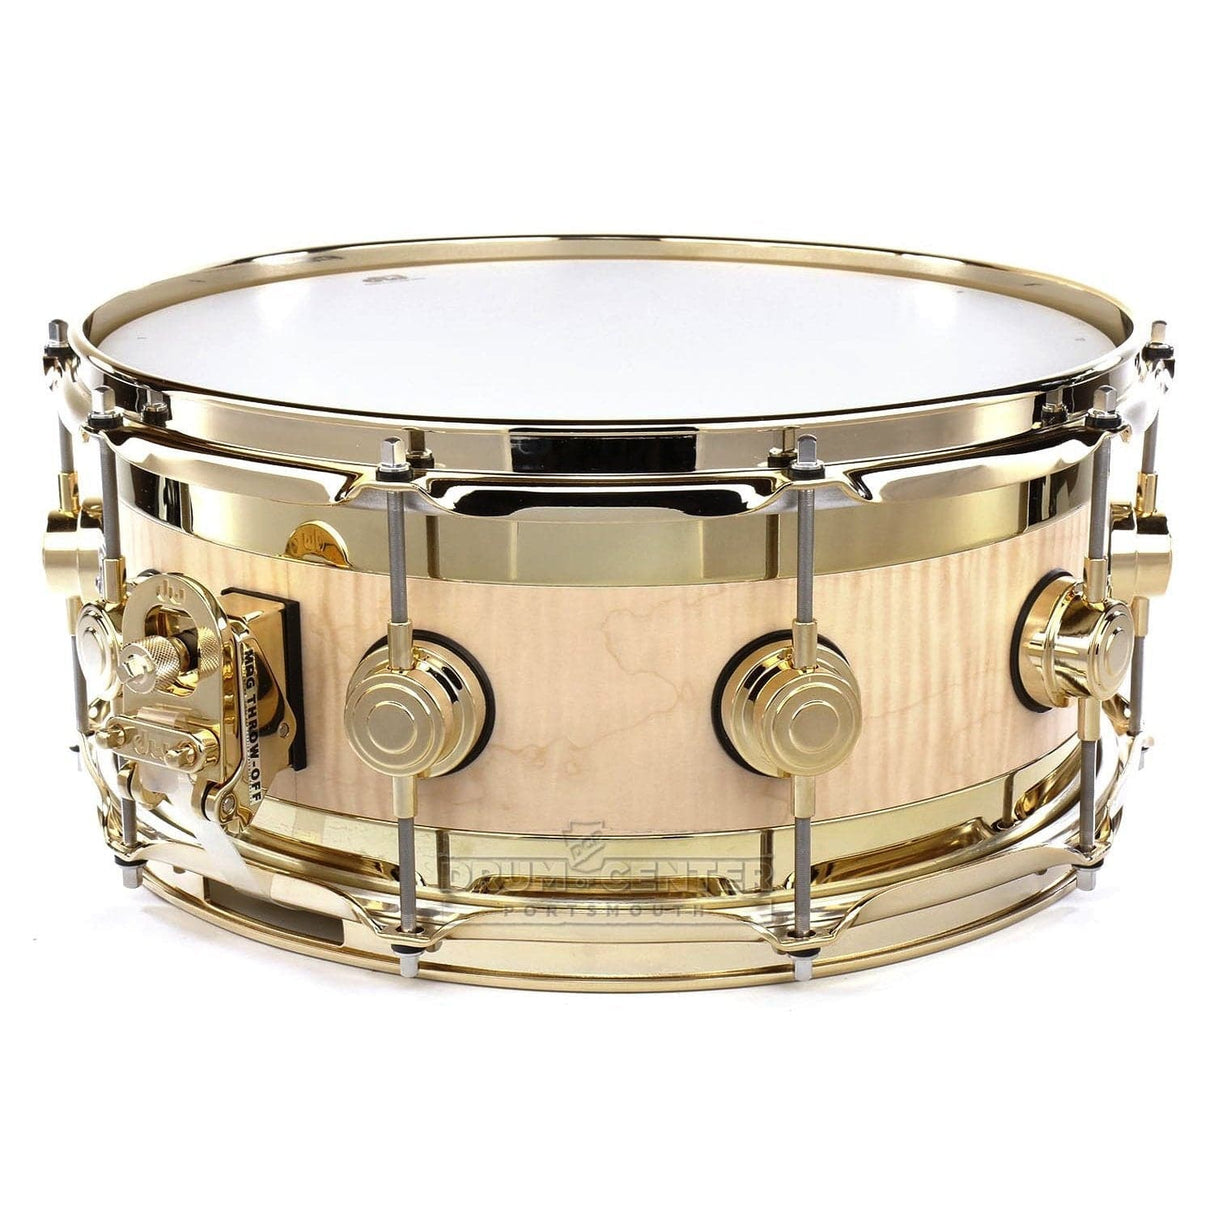 DW Collectors Edge Snare Drum 14x6 Natural Satin Oil w/Gold Hardware